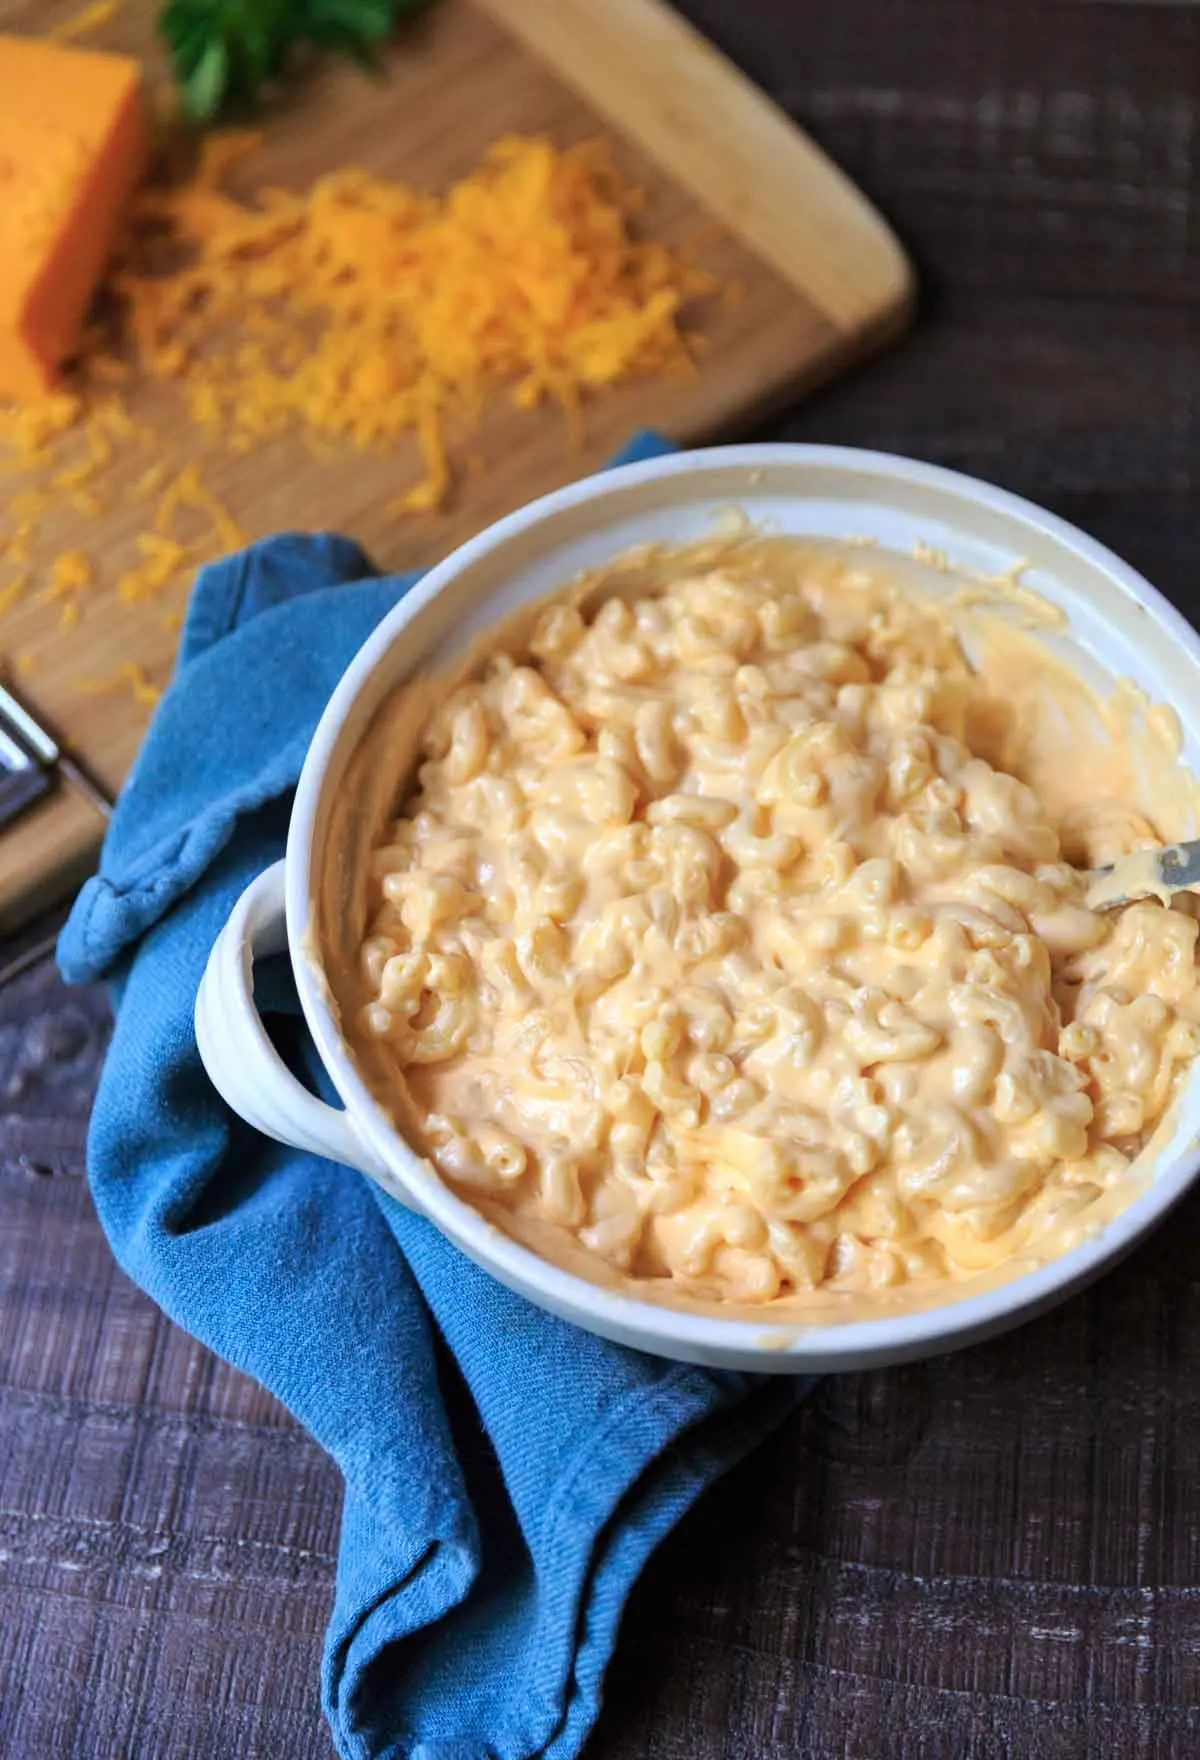 mixes cheddar cheese sauce and macaroni noodles before mixing